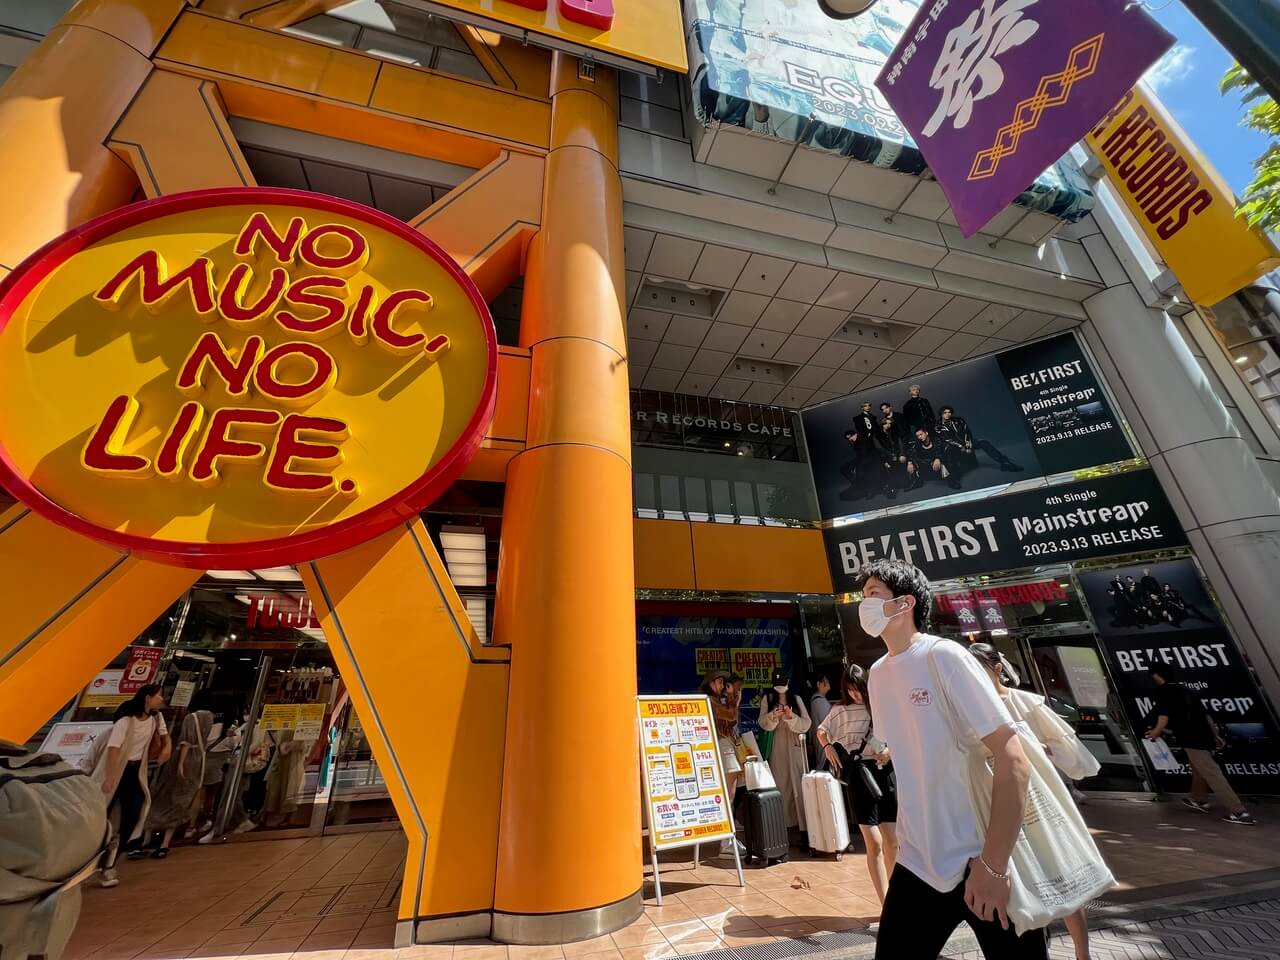 No Music, No Life sign in Japan